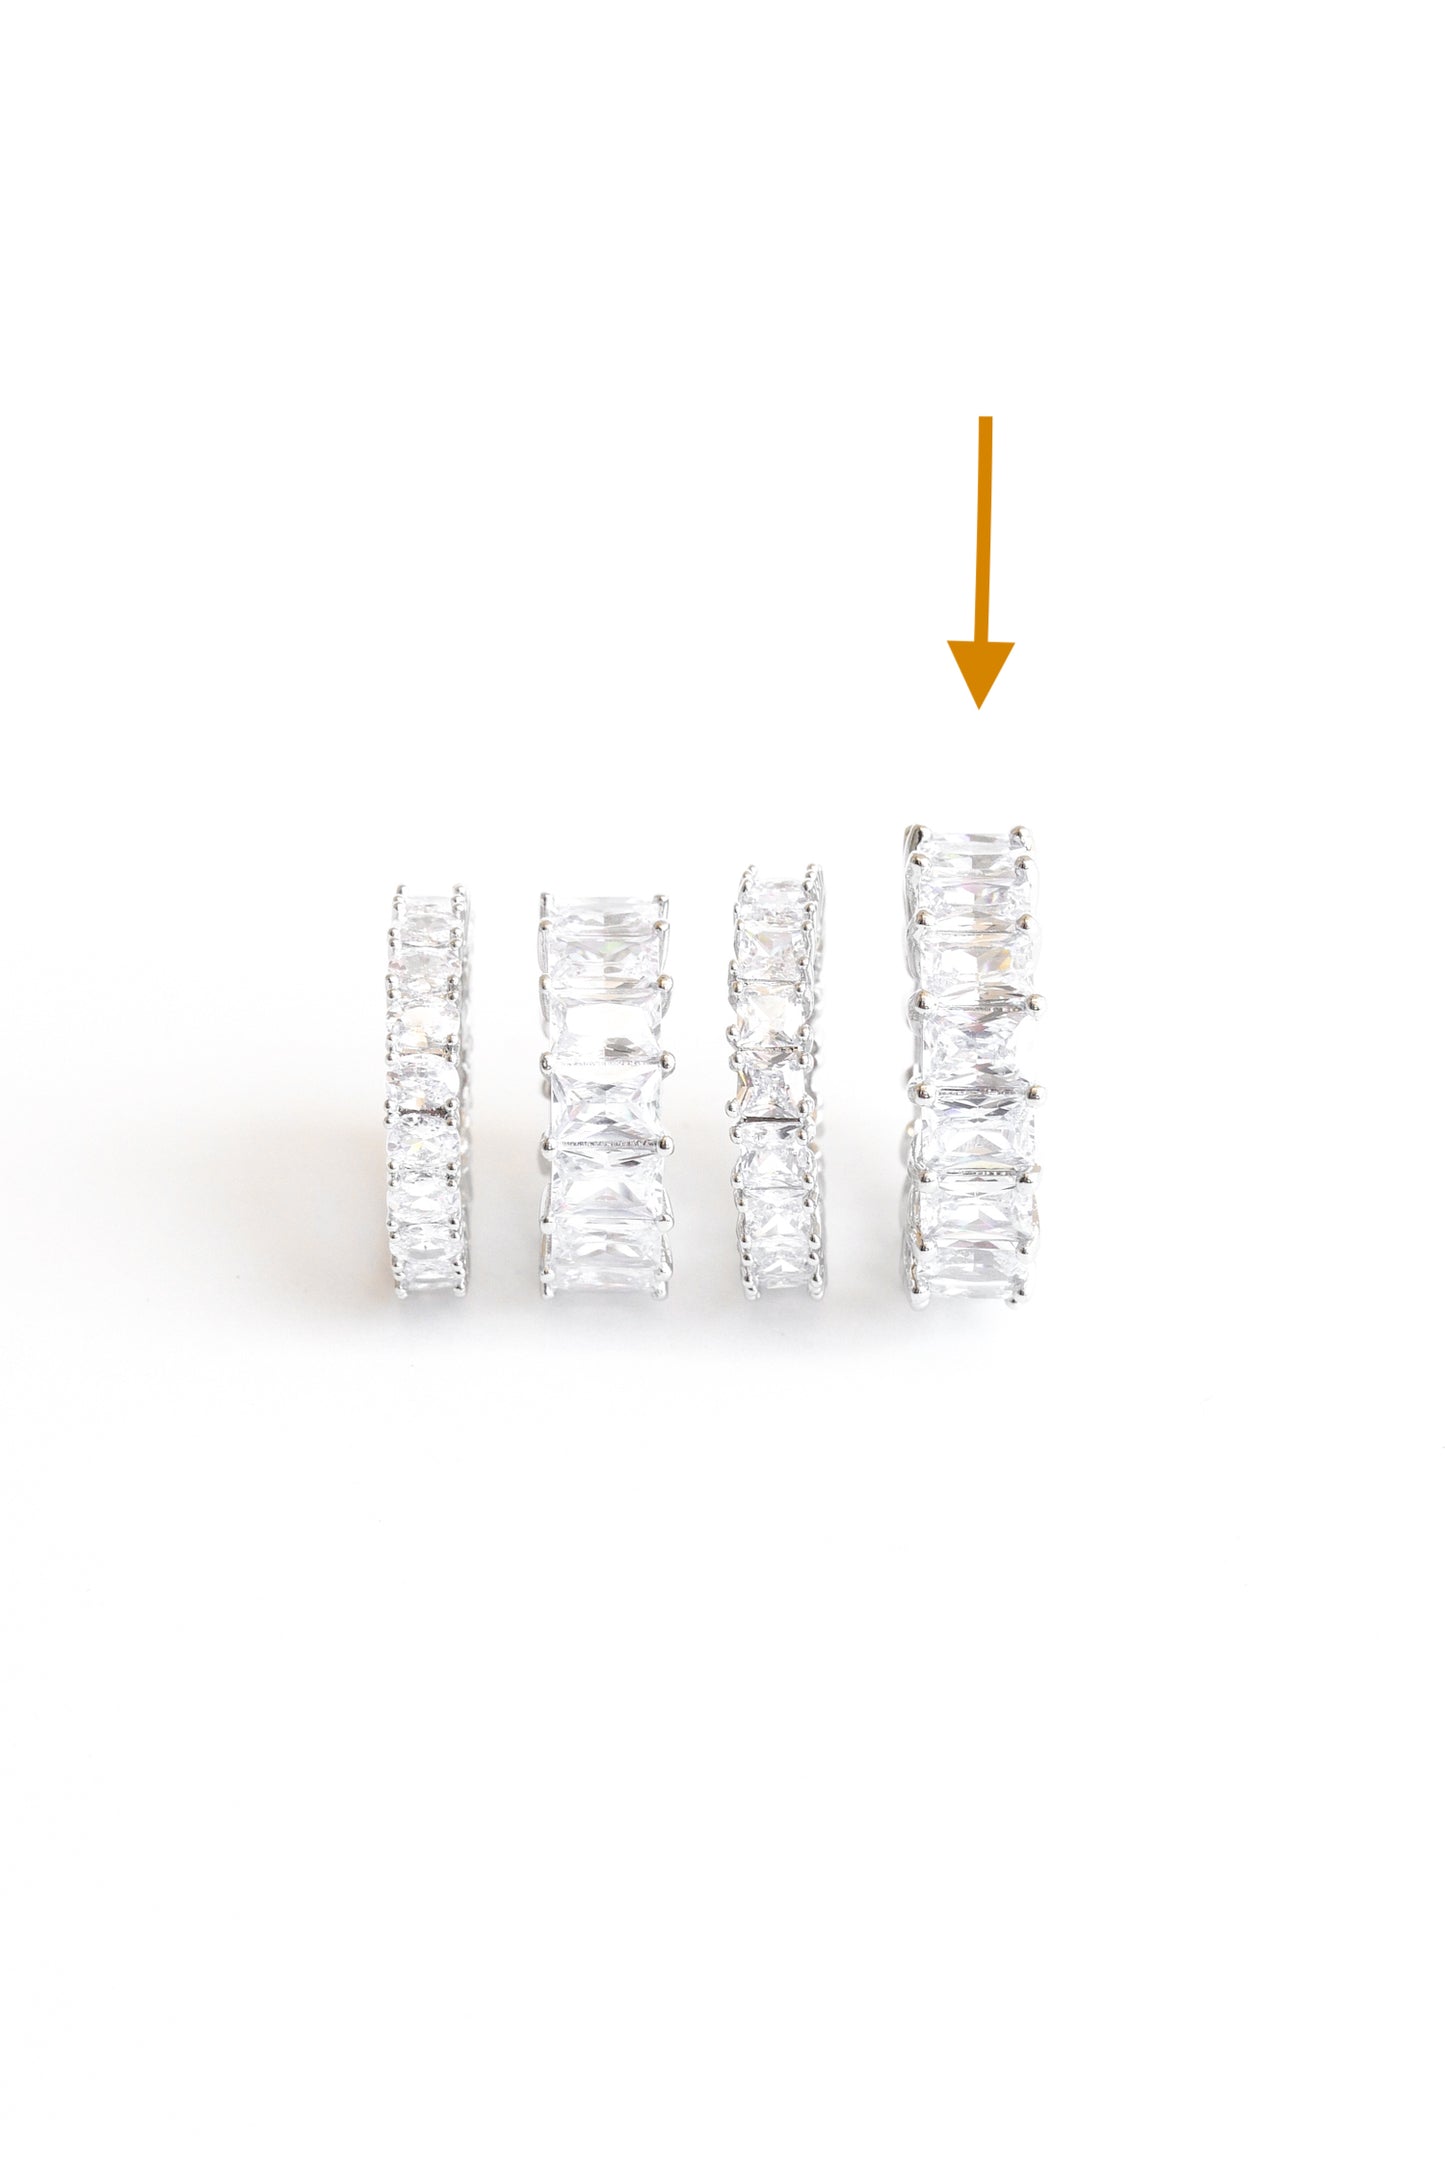 Orange arrow point to amor ice ring in  ring line up of AMOR DEUS current crystal rings